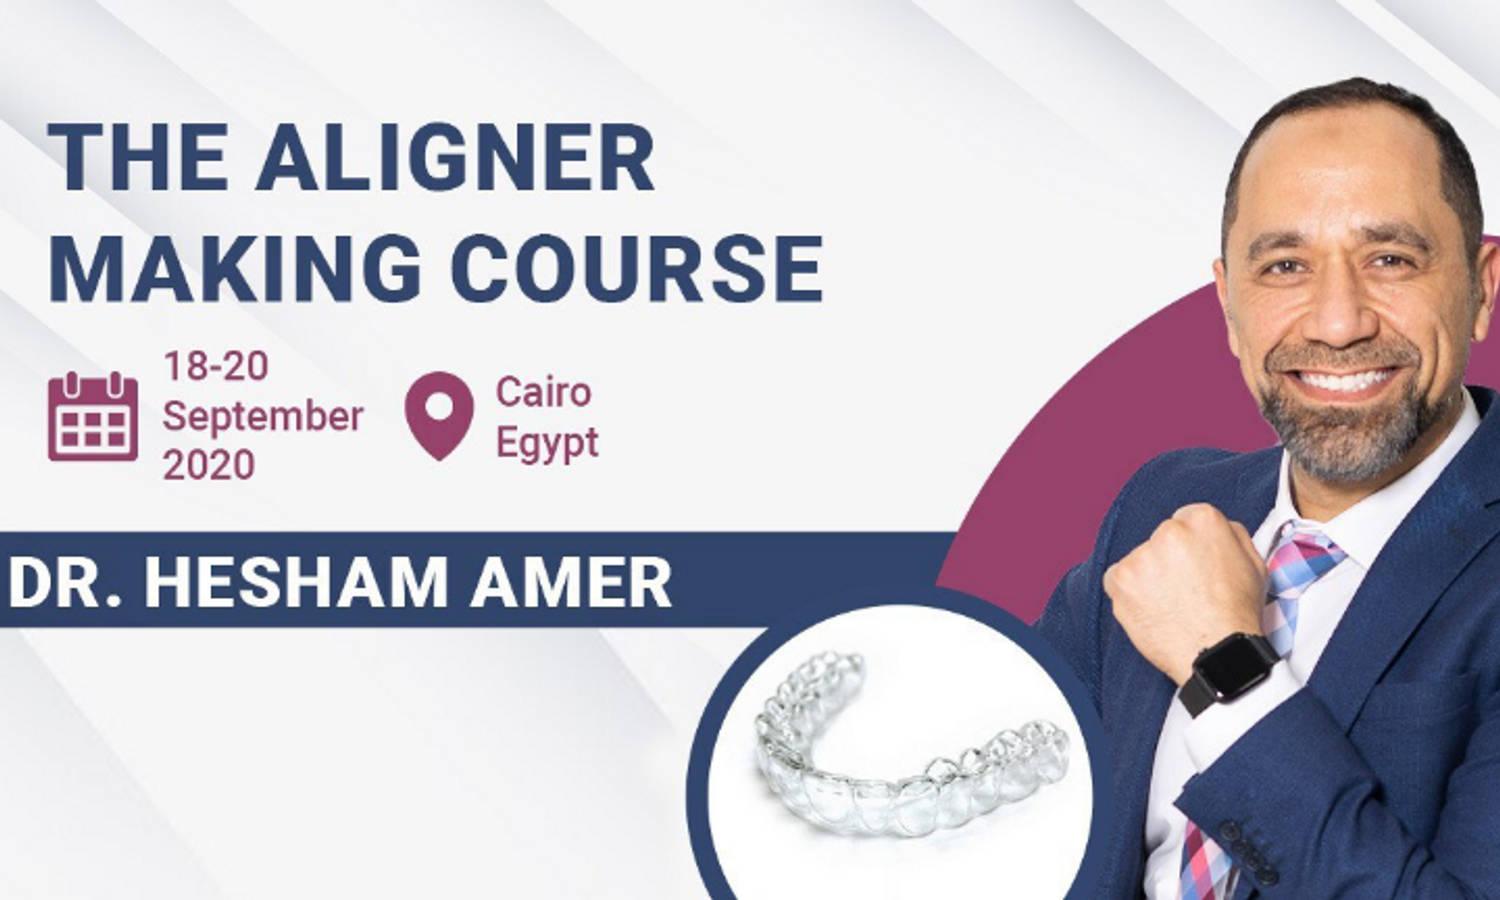 The Aligner Making Course